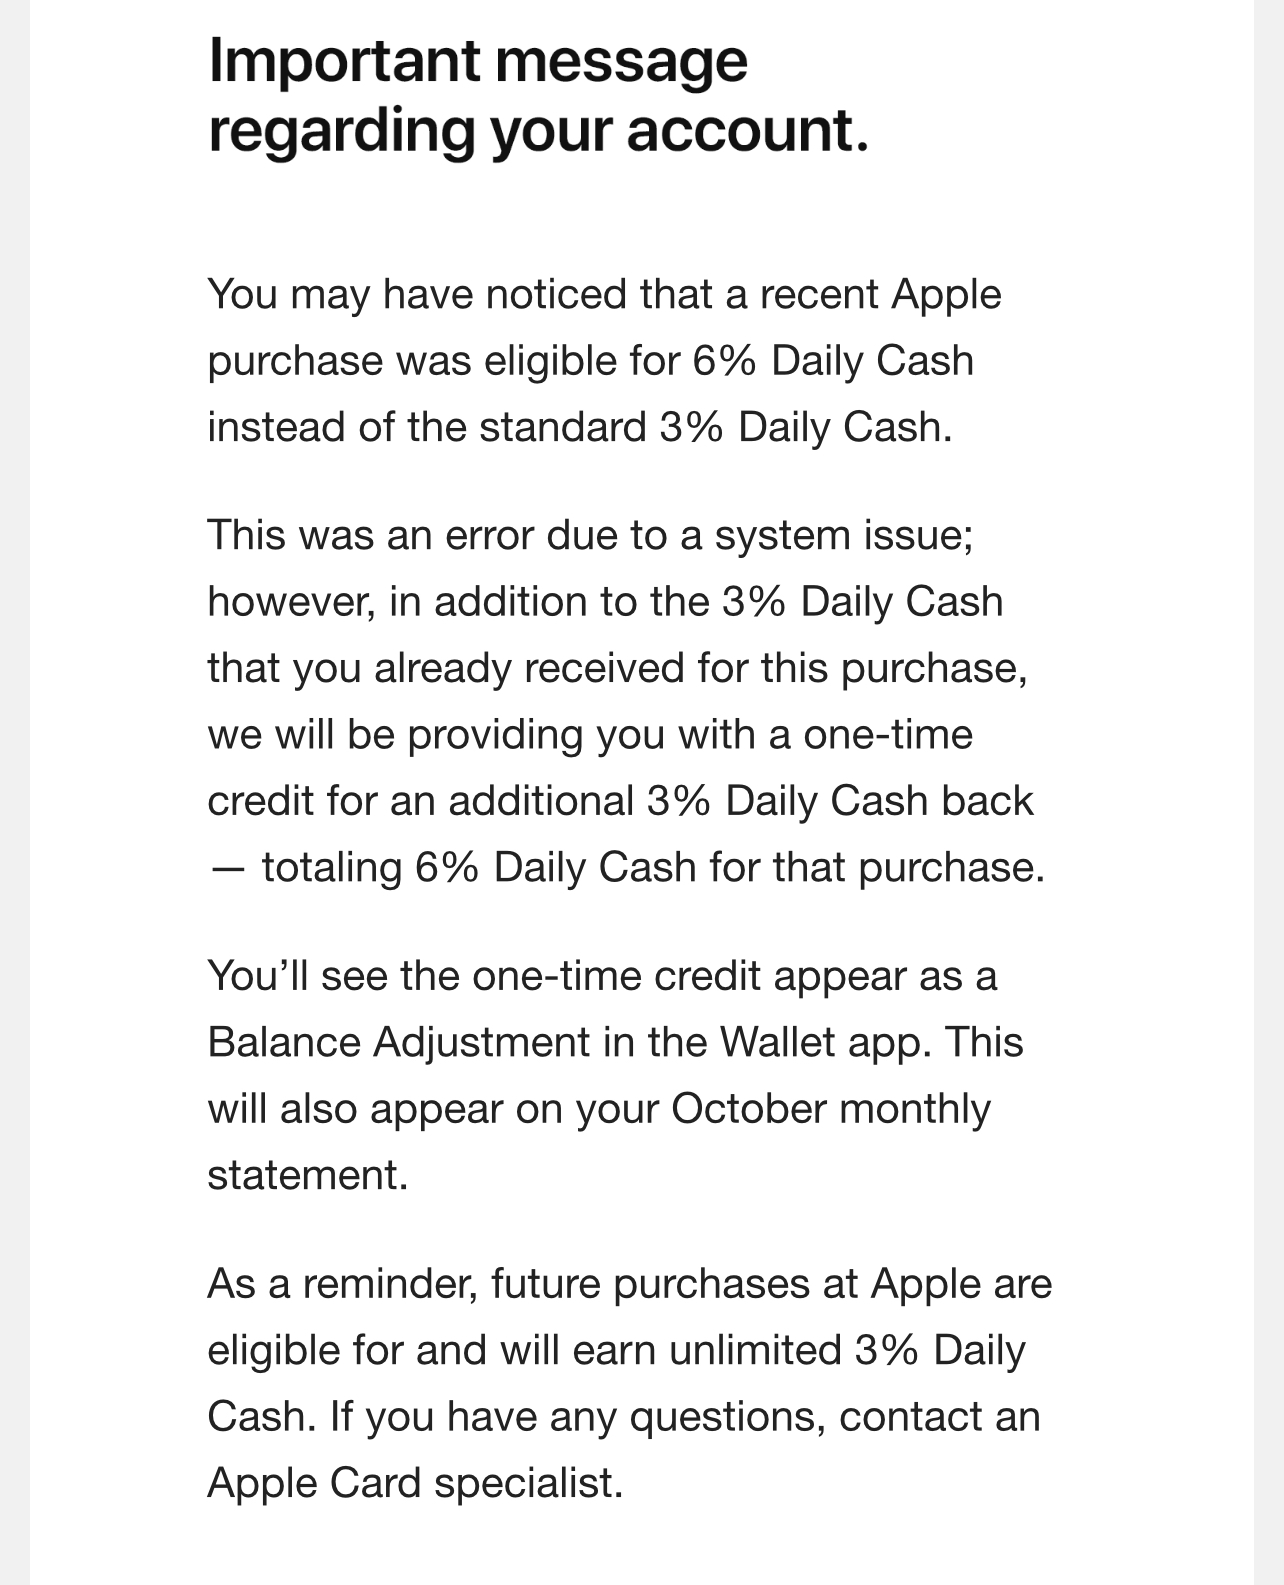 New Apple Card Customers Can Get 6% Daily Cash on Apple Purchases